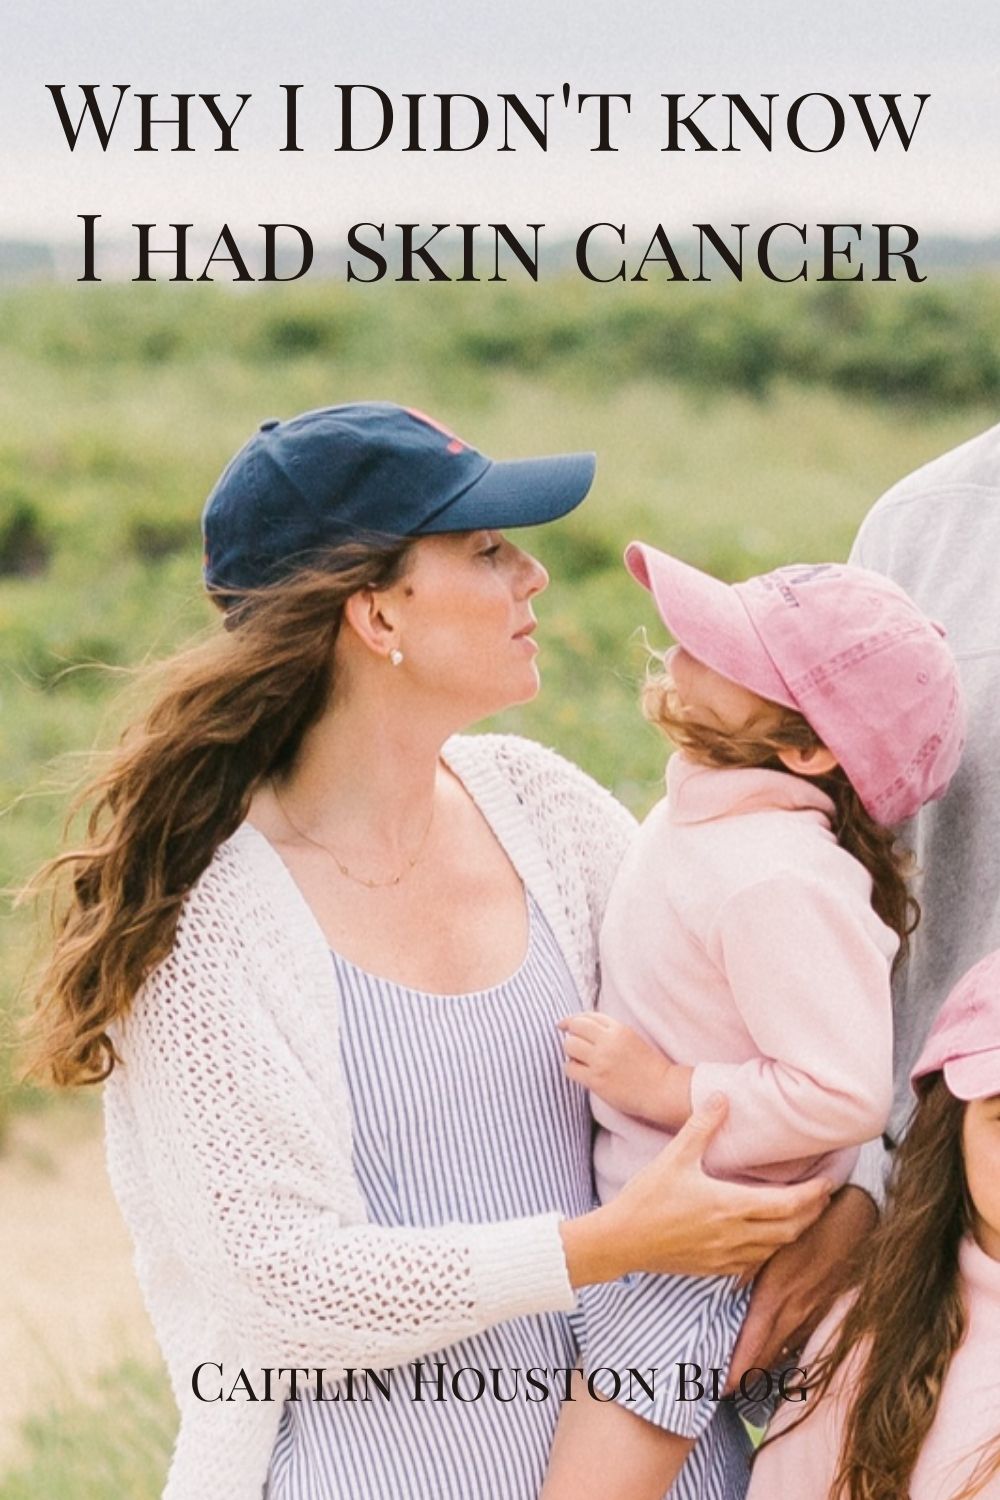 A woman with skin cancer